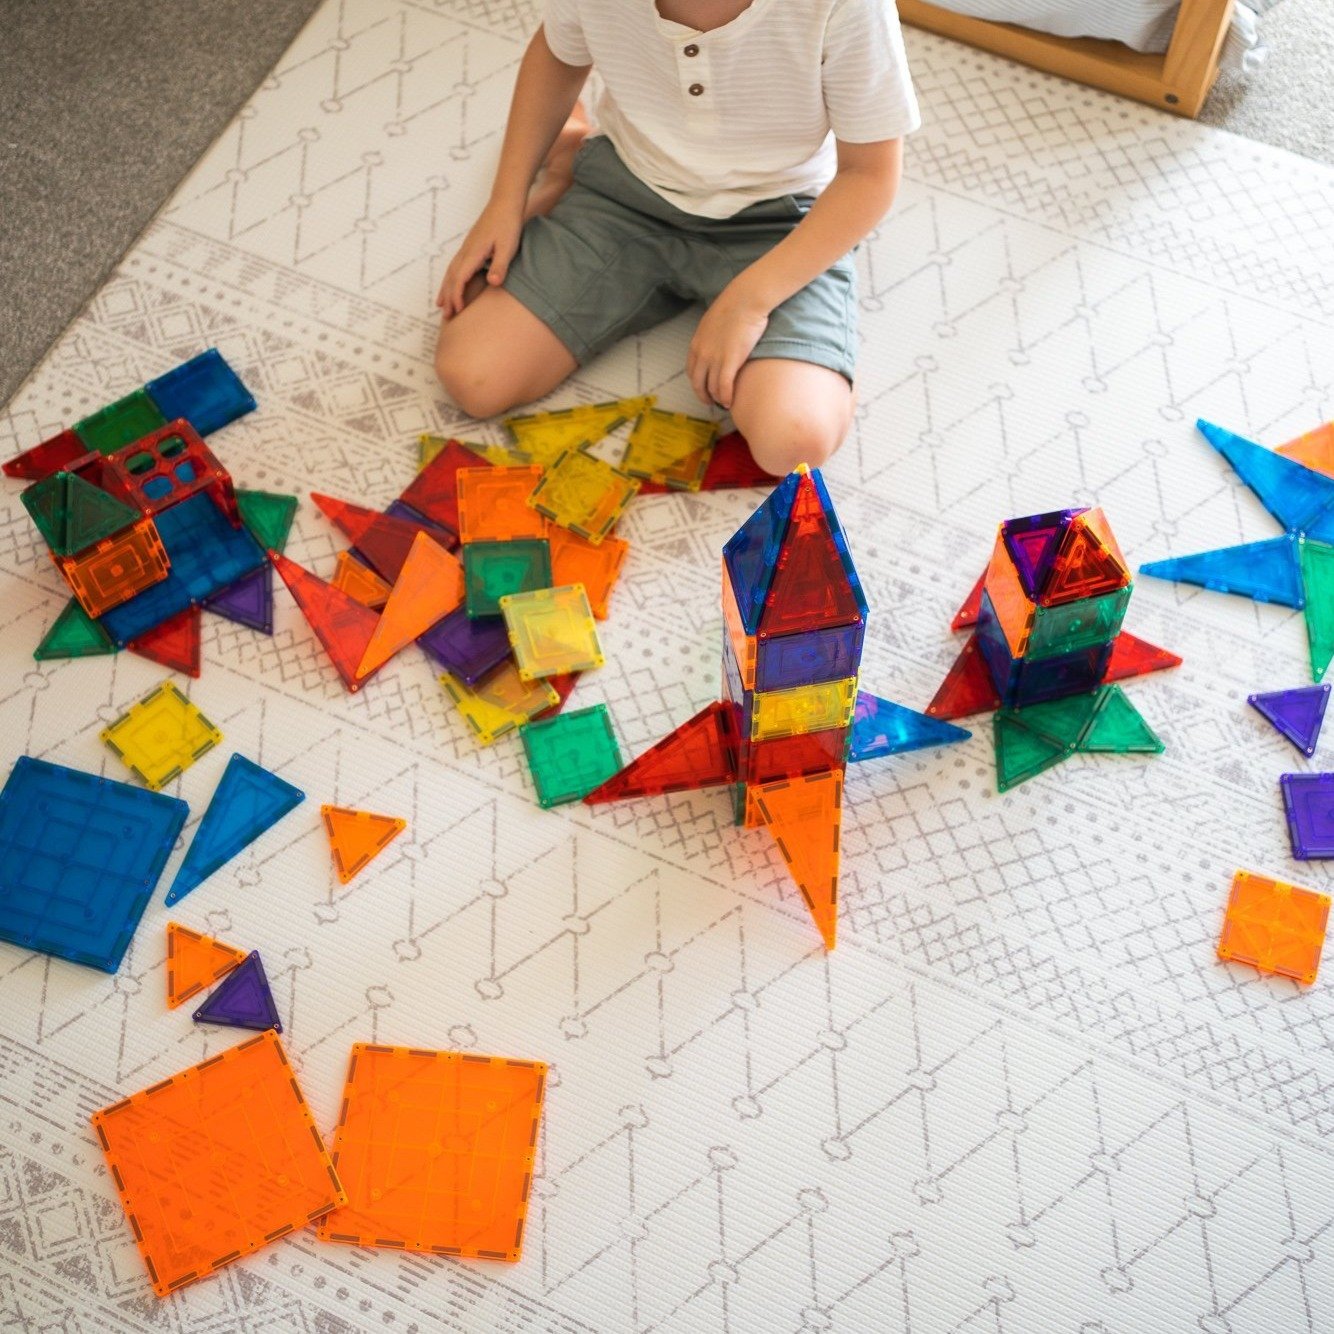 The No. 1 Toy in Our House: 10 Ways My Kids Play With Magnetic Tiles -  Stories of Play